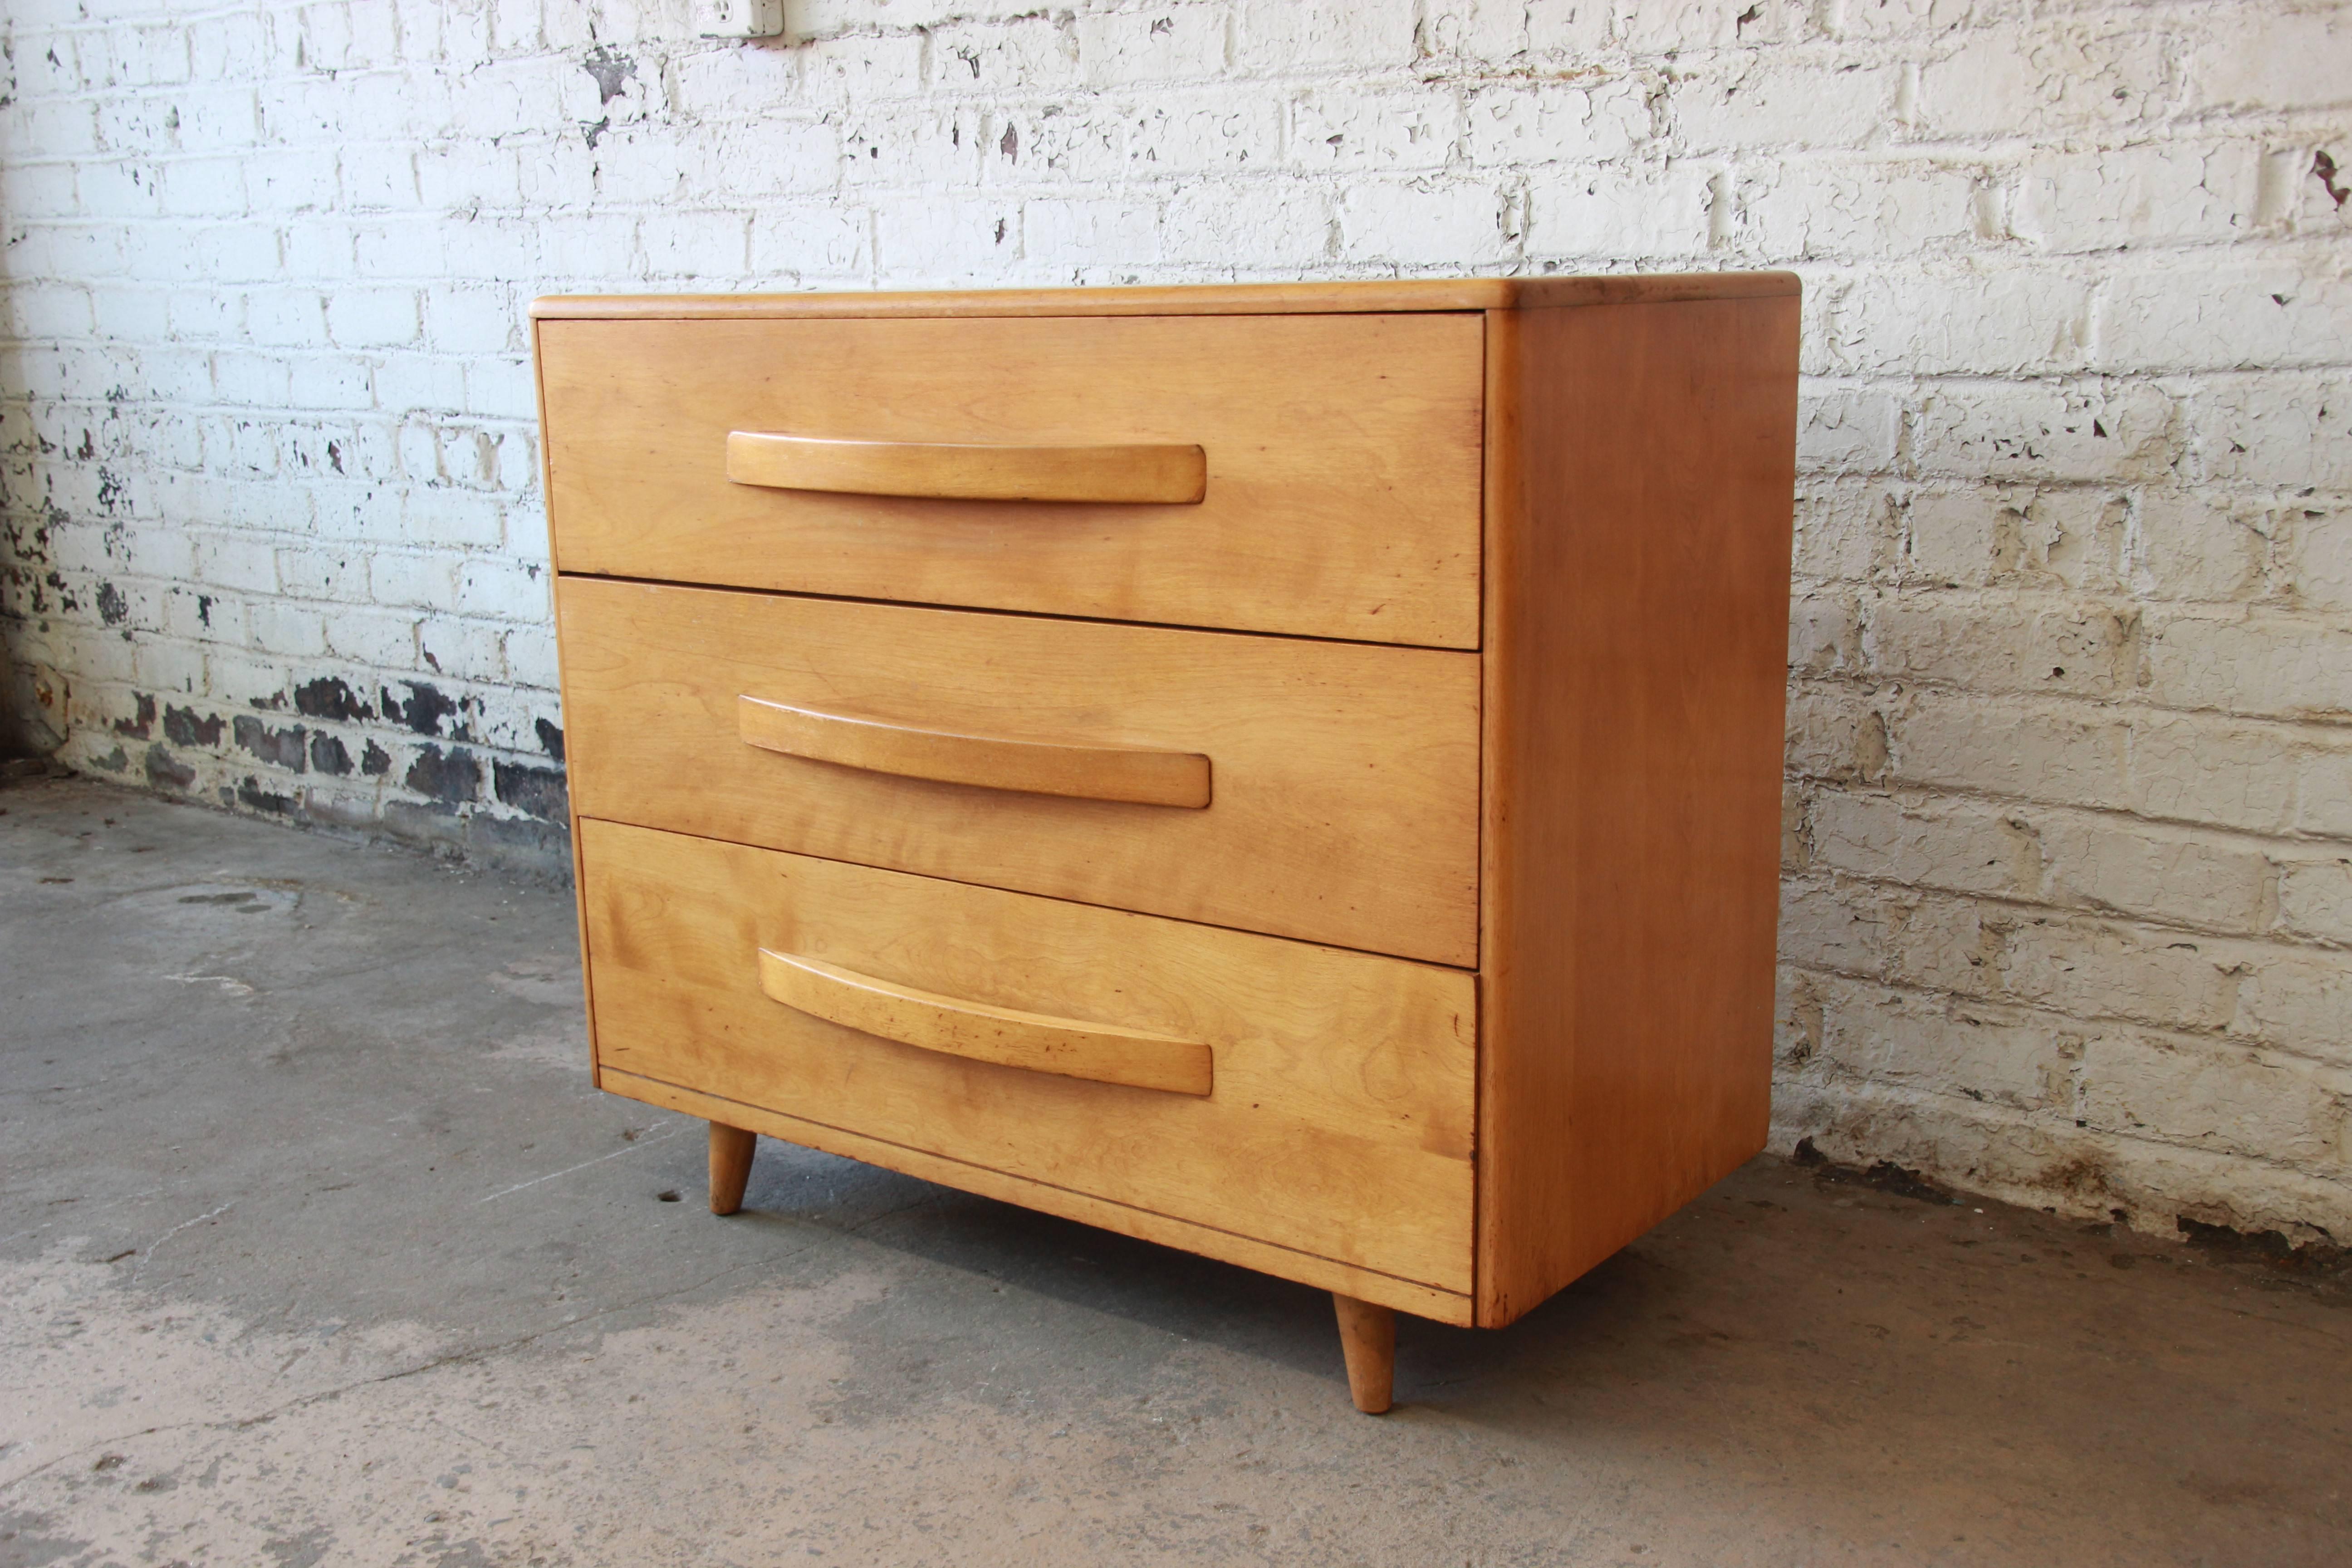 Offering a very nice Mid-Century Modern bachelor chest by Heywood Wakefield. The chest of drawers features solid birch wood construction and sleek mid-century design. It offers three deep drawers for storage, each with sculpted solid wood drawer